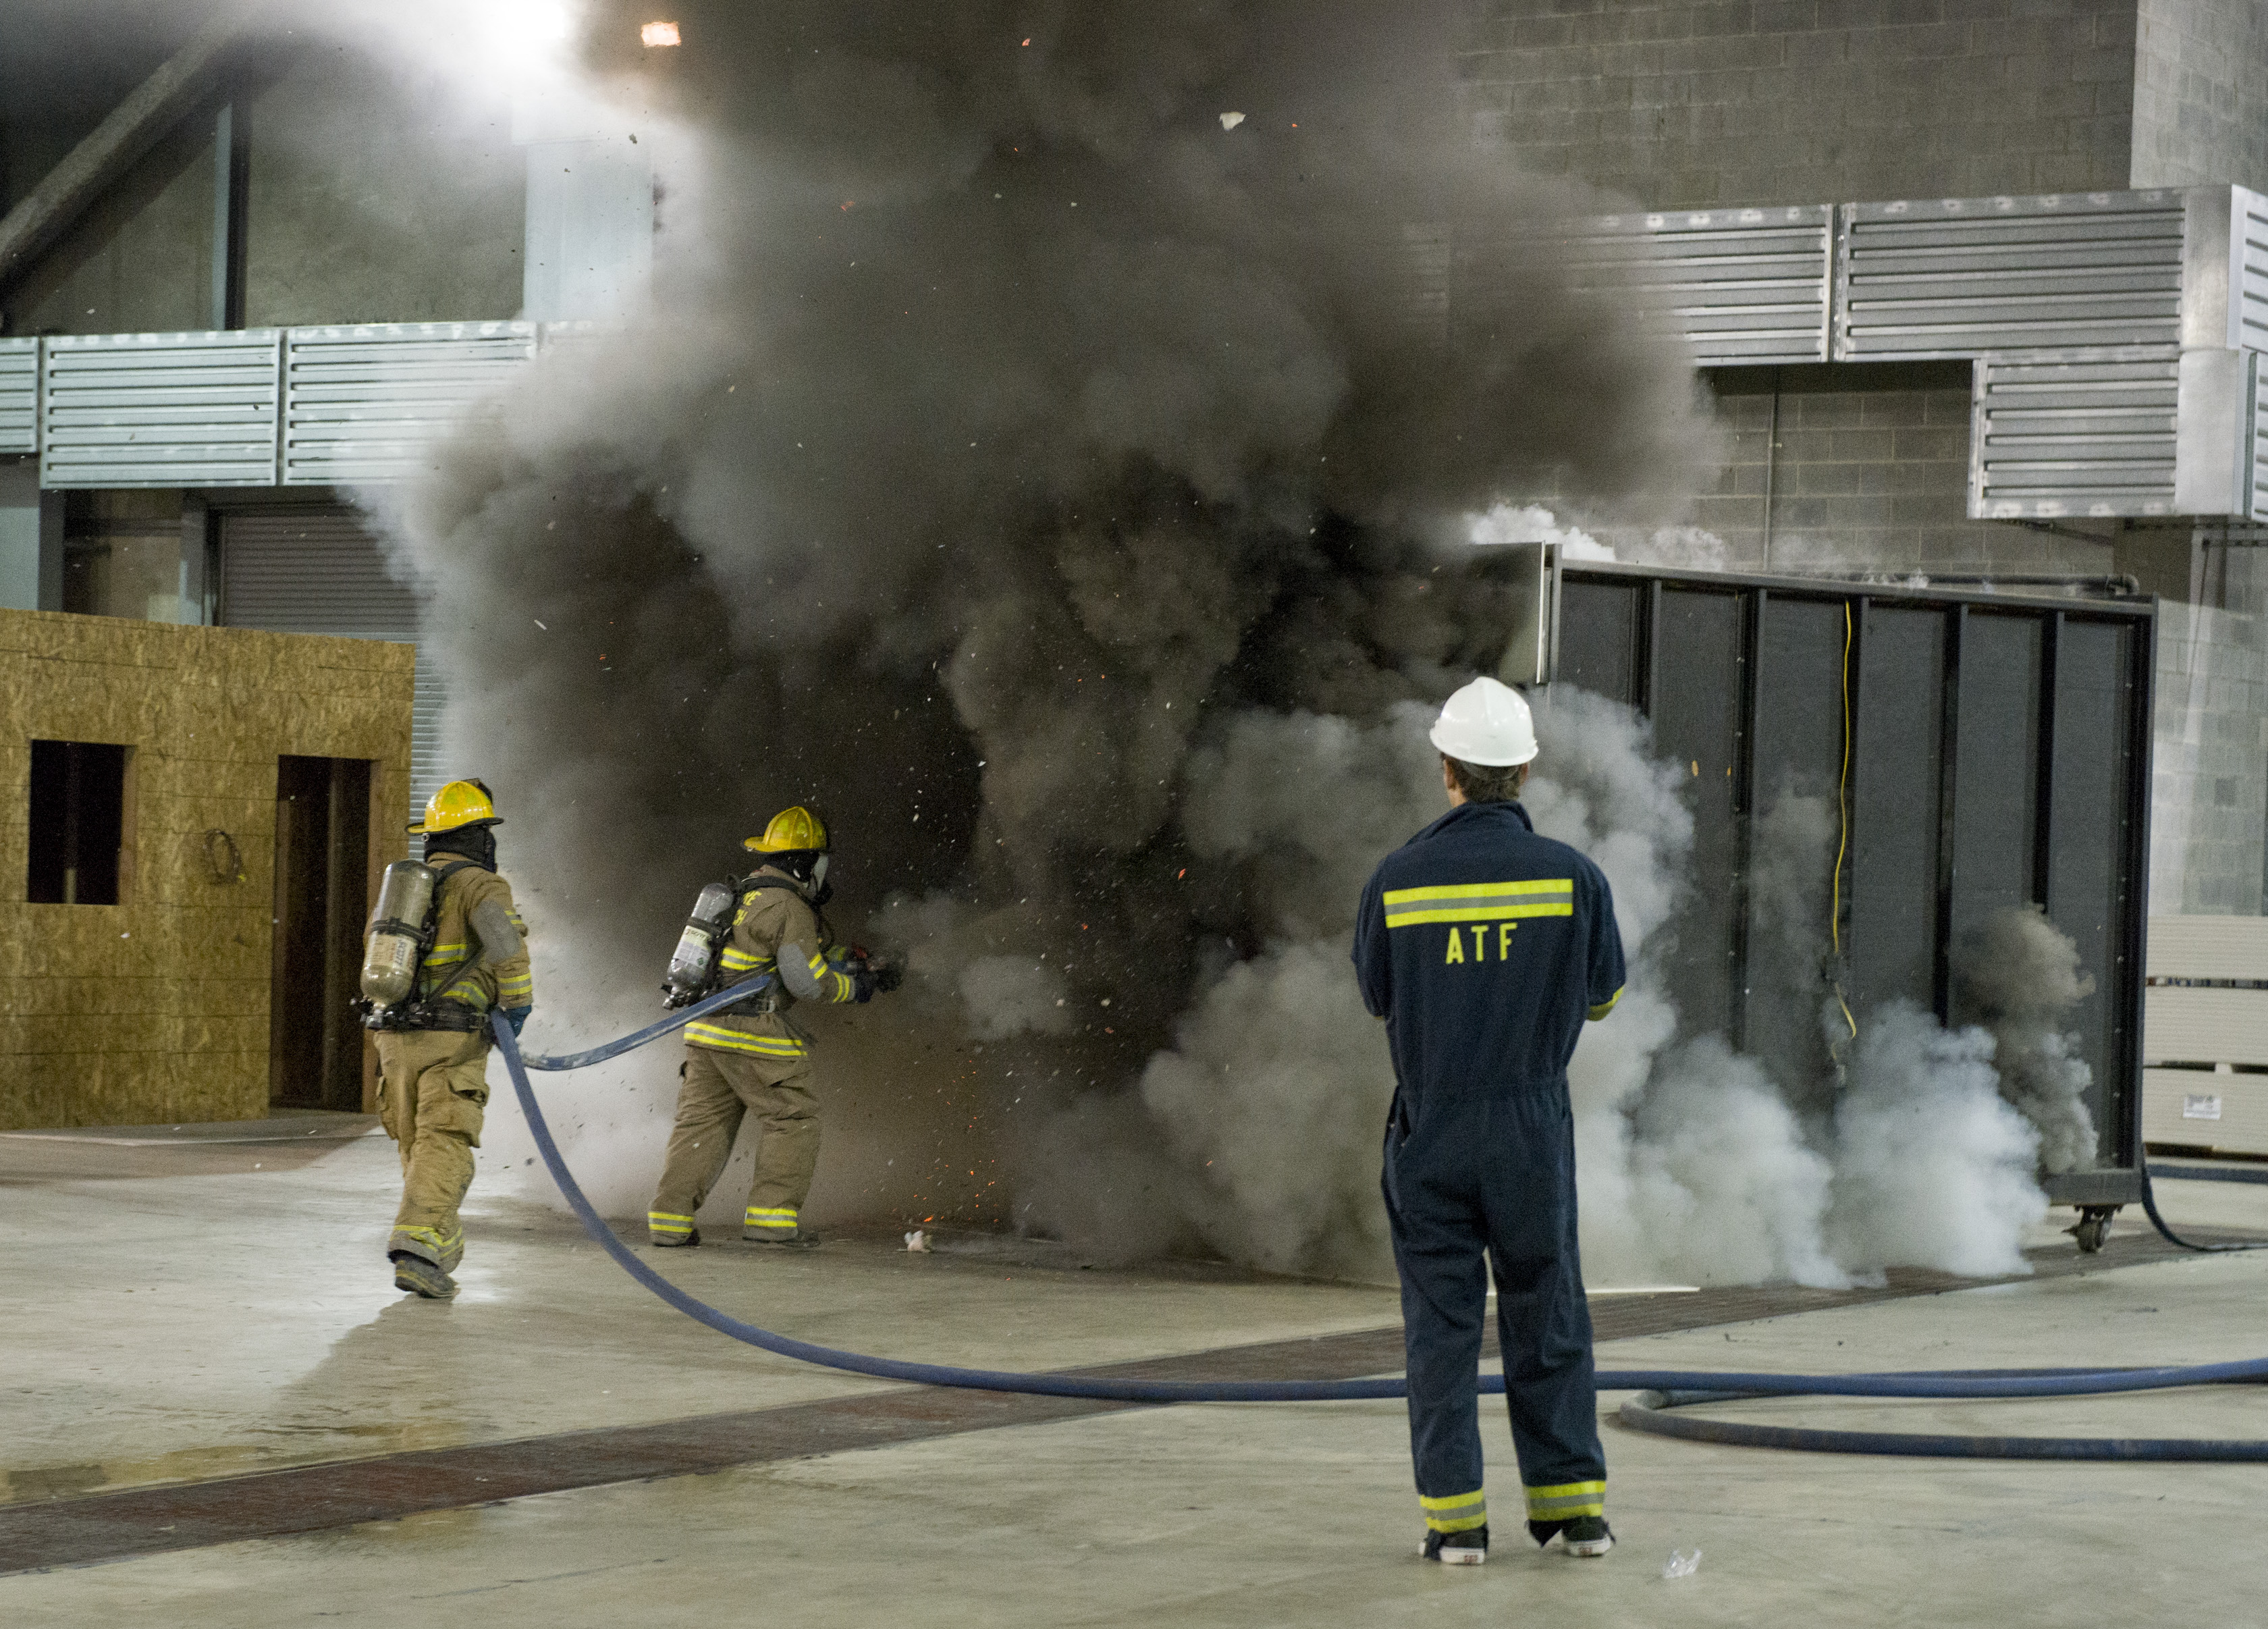 Two firemen use their hoses to extinguish a fire overseen by an ATF instructor.